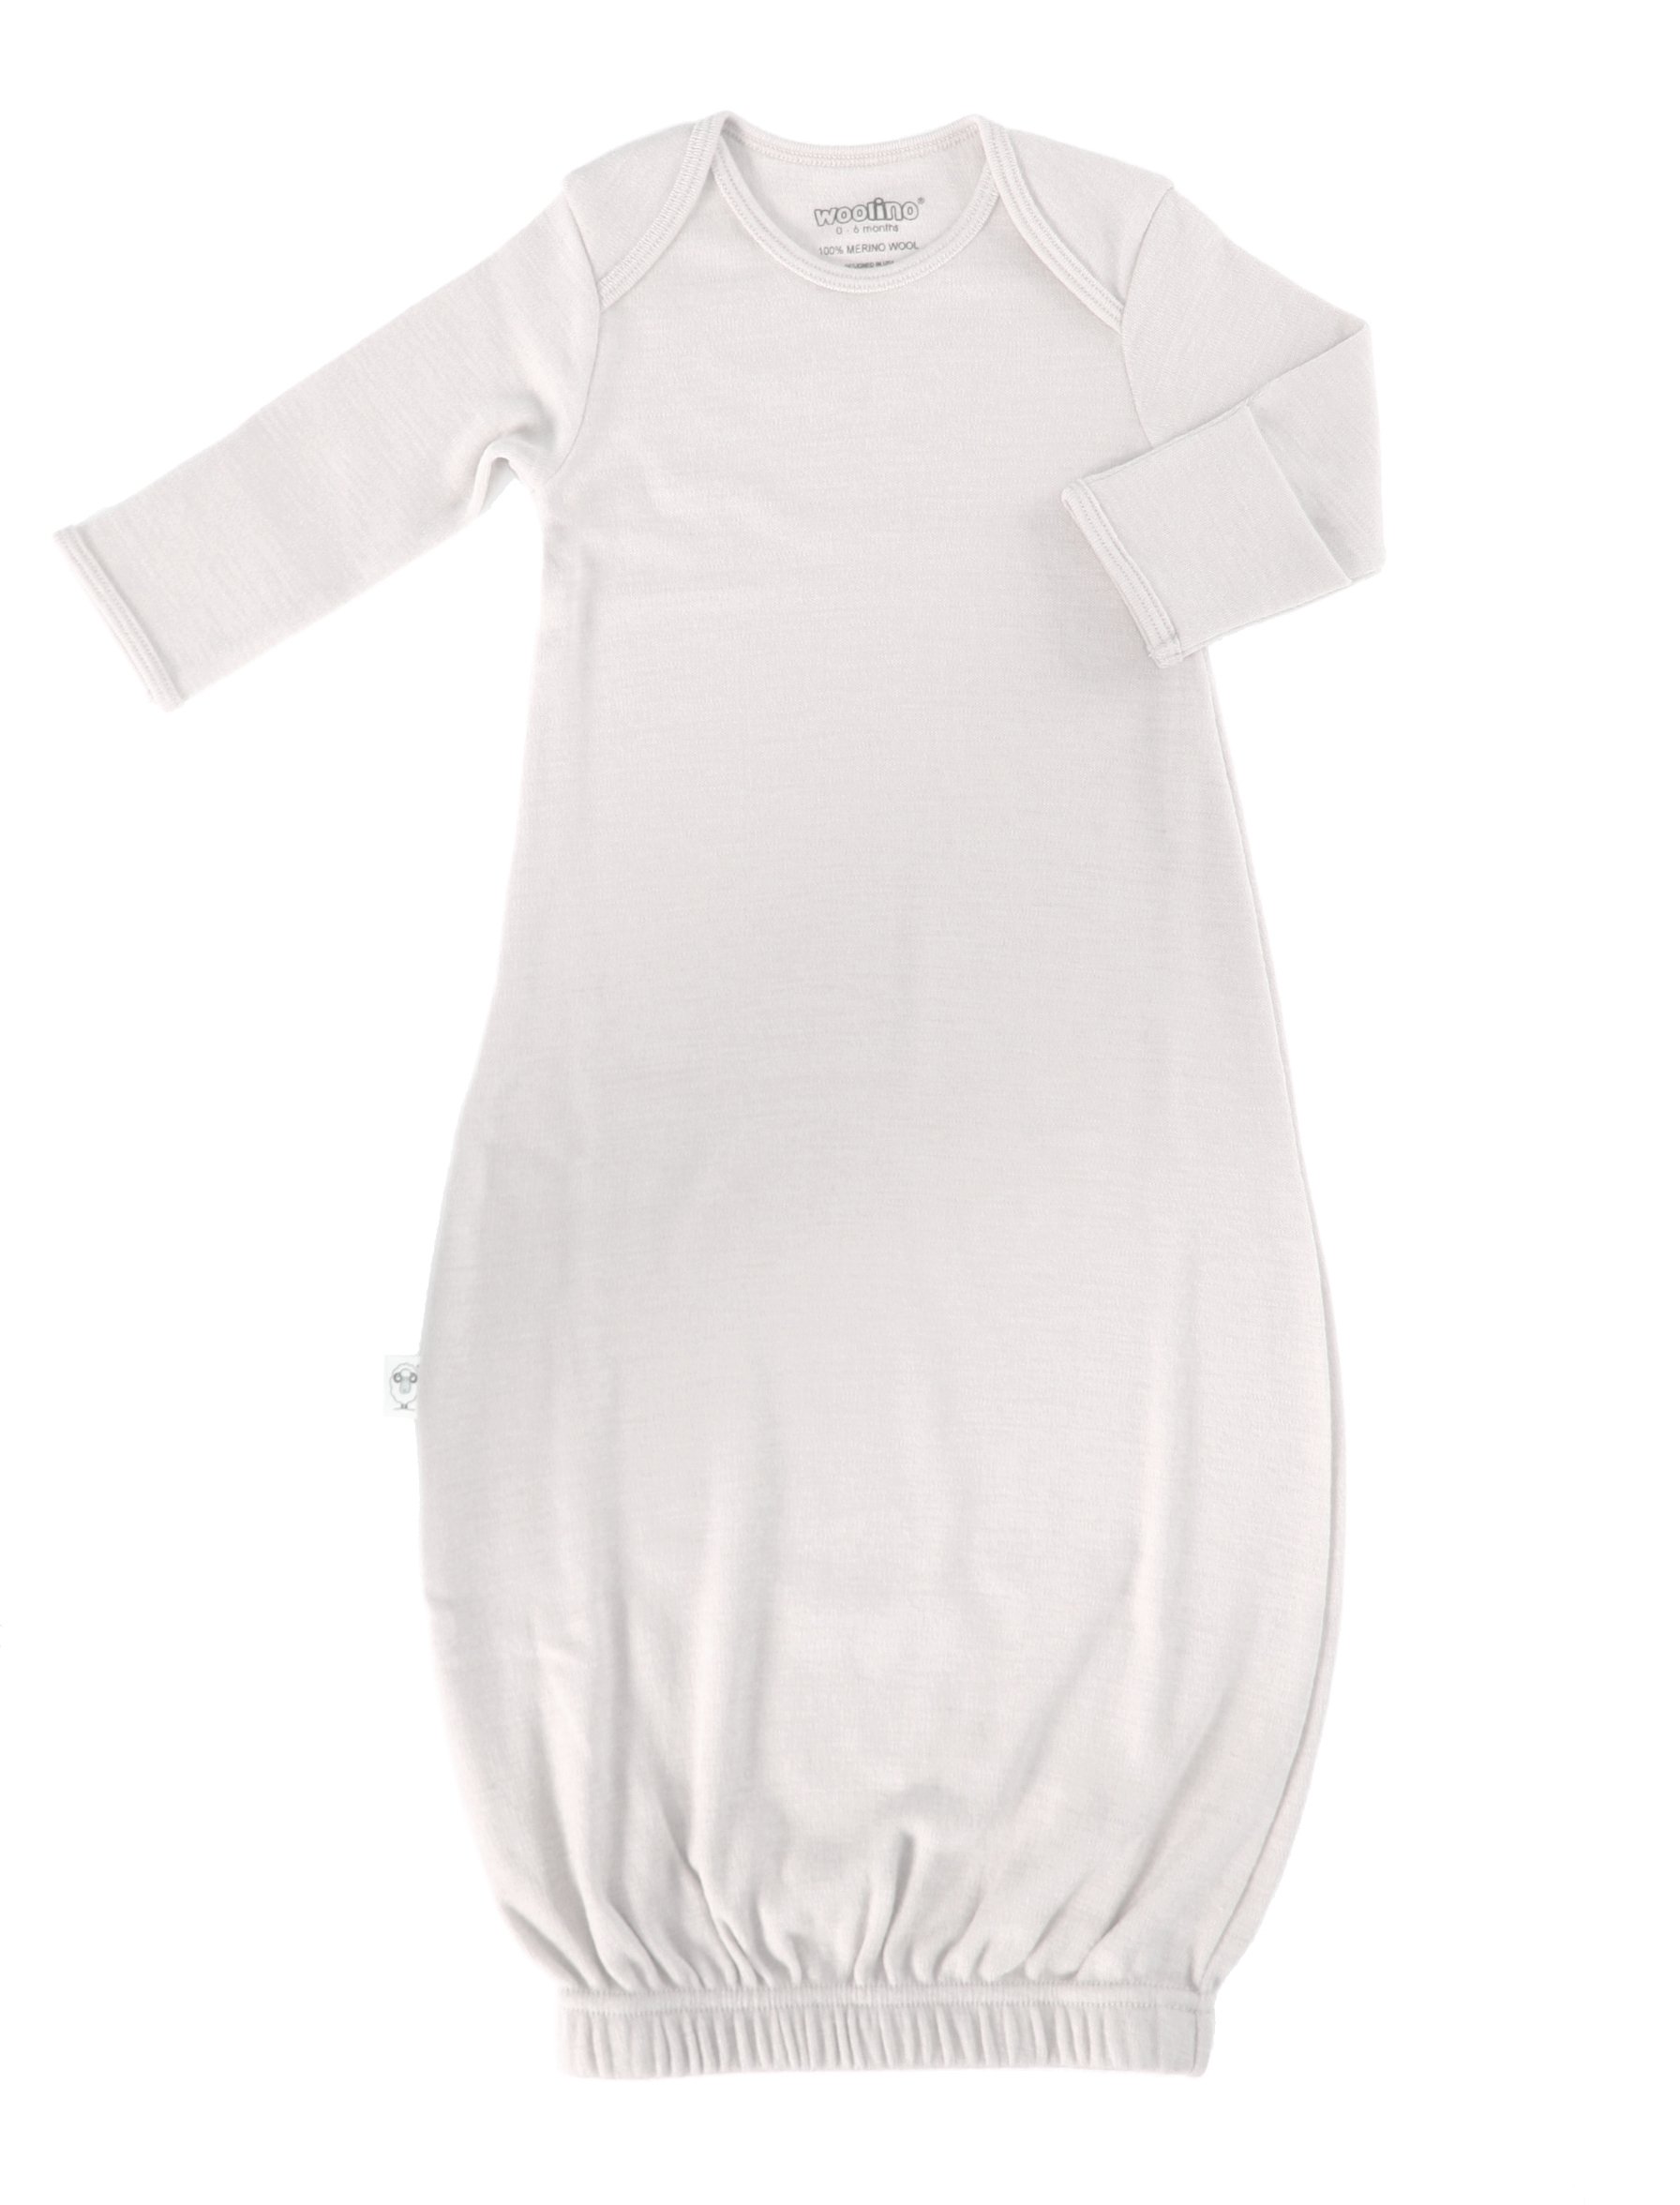 Woolino Infant Gown, 100% Superfine Merino Wool, for Babies 0-6 Months